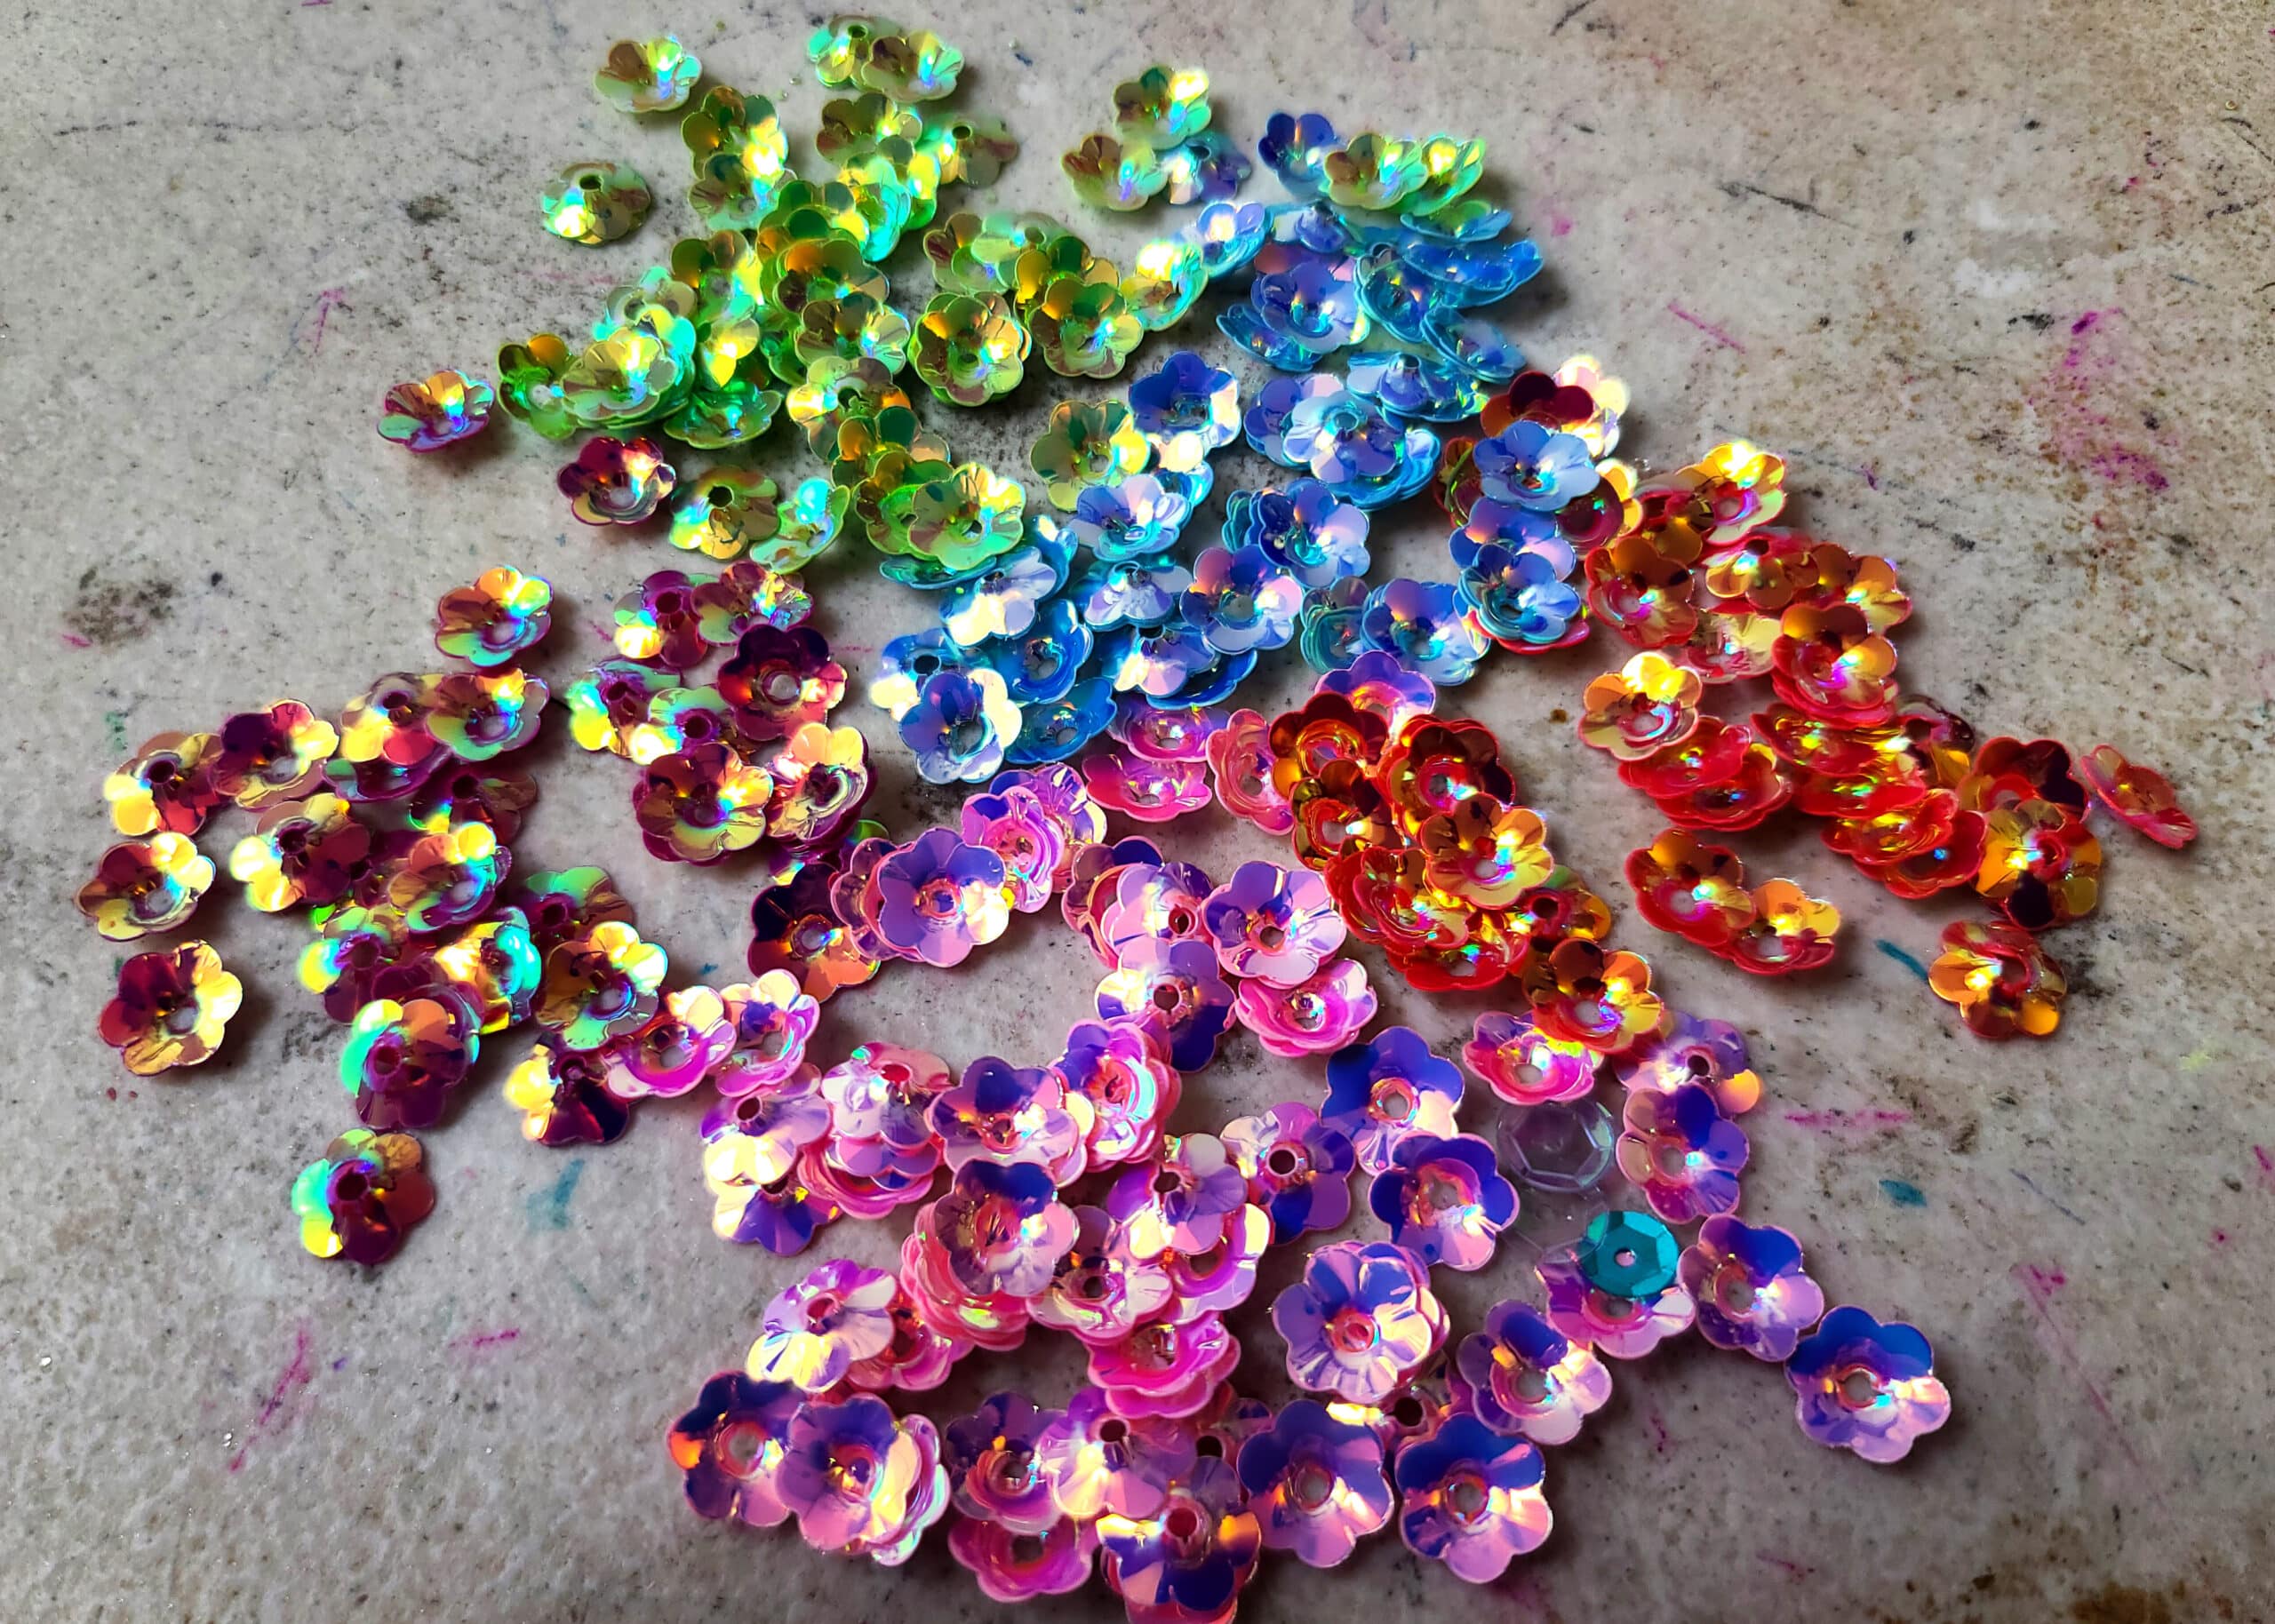 Several piles of iridescent, flower-shaped sequins in pink, orange, blue, green, and purple.